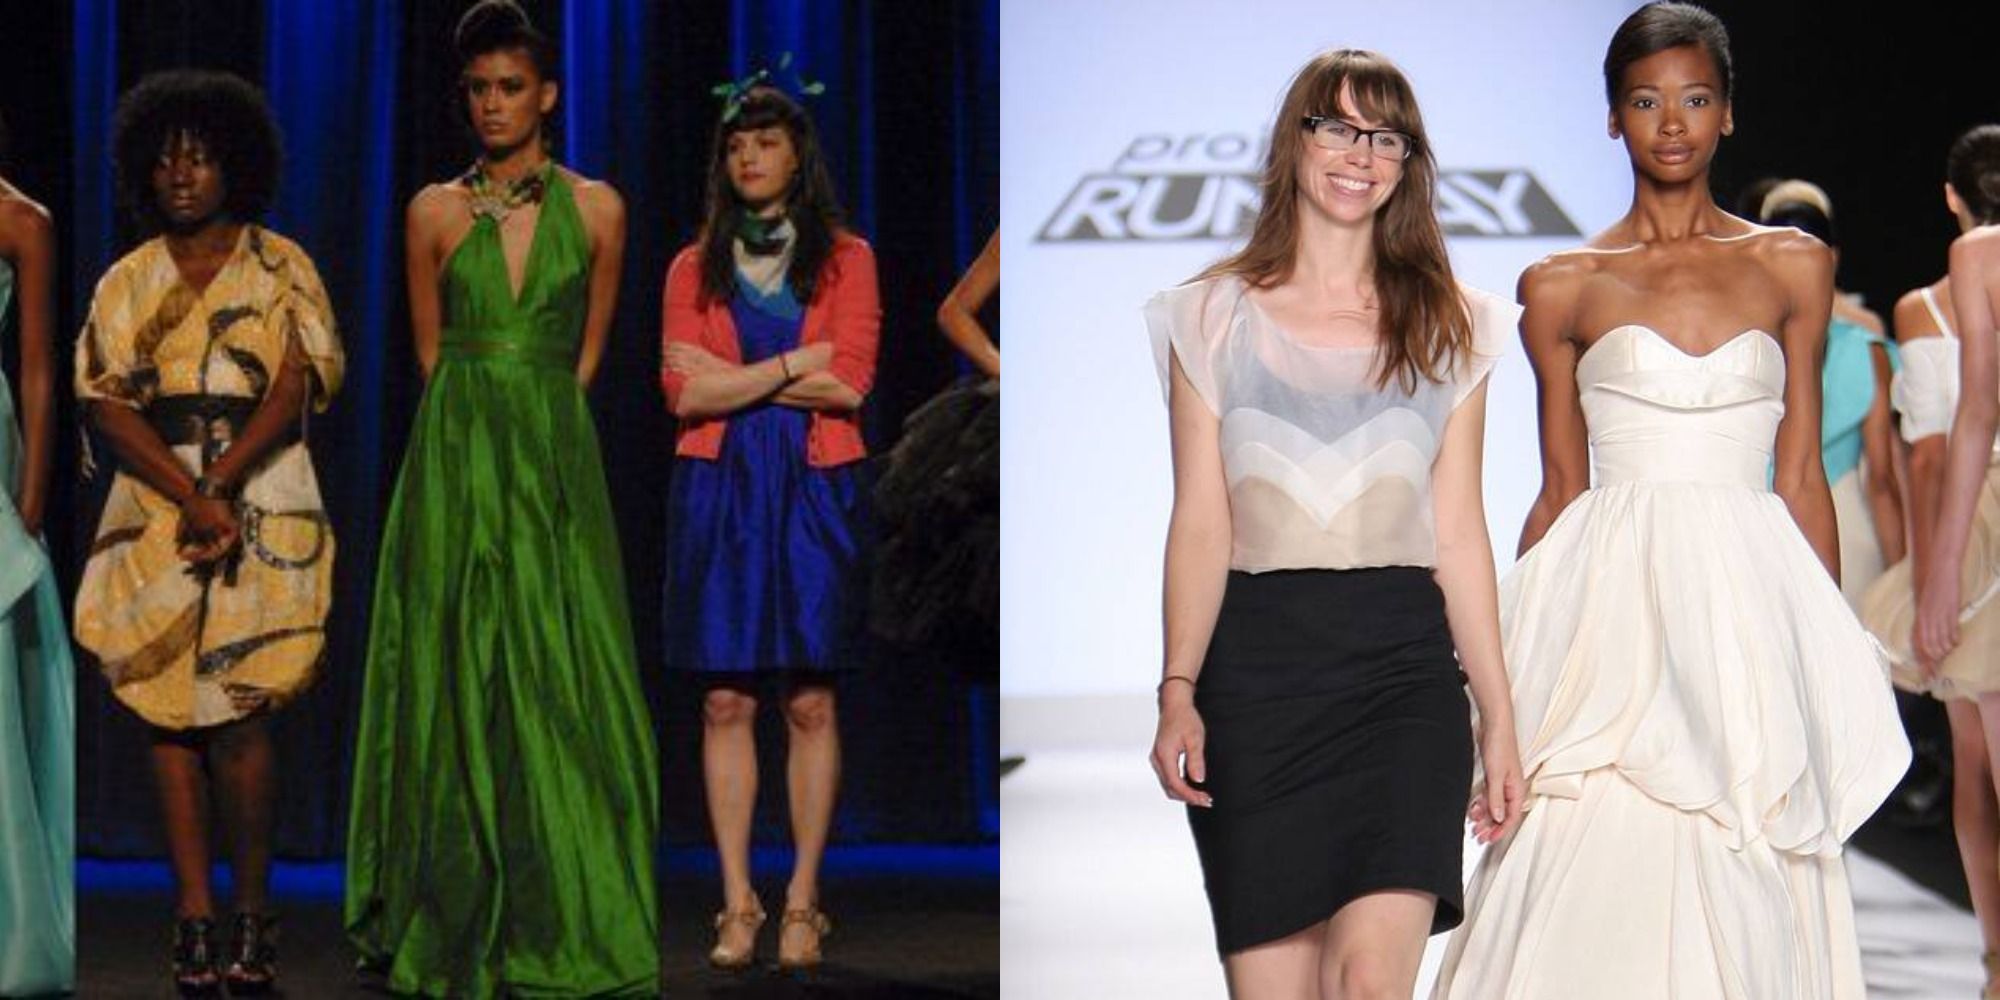 Split image showing Korto and Kenley with a model, and season 5 winner Leanne Marshall with her model